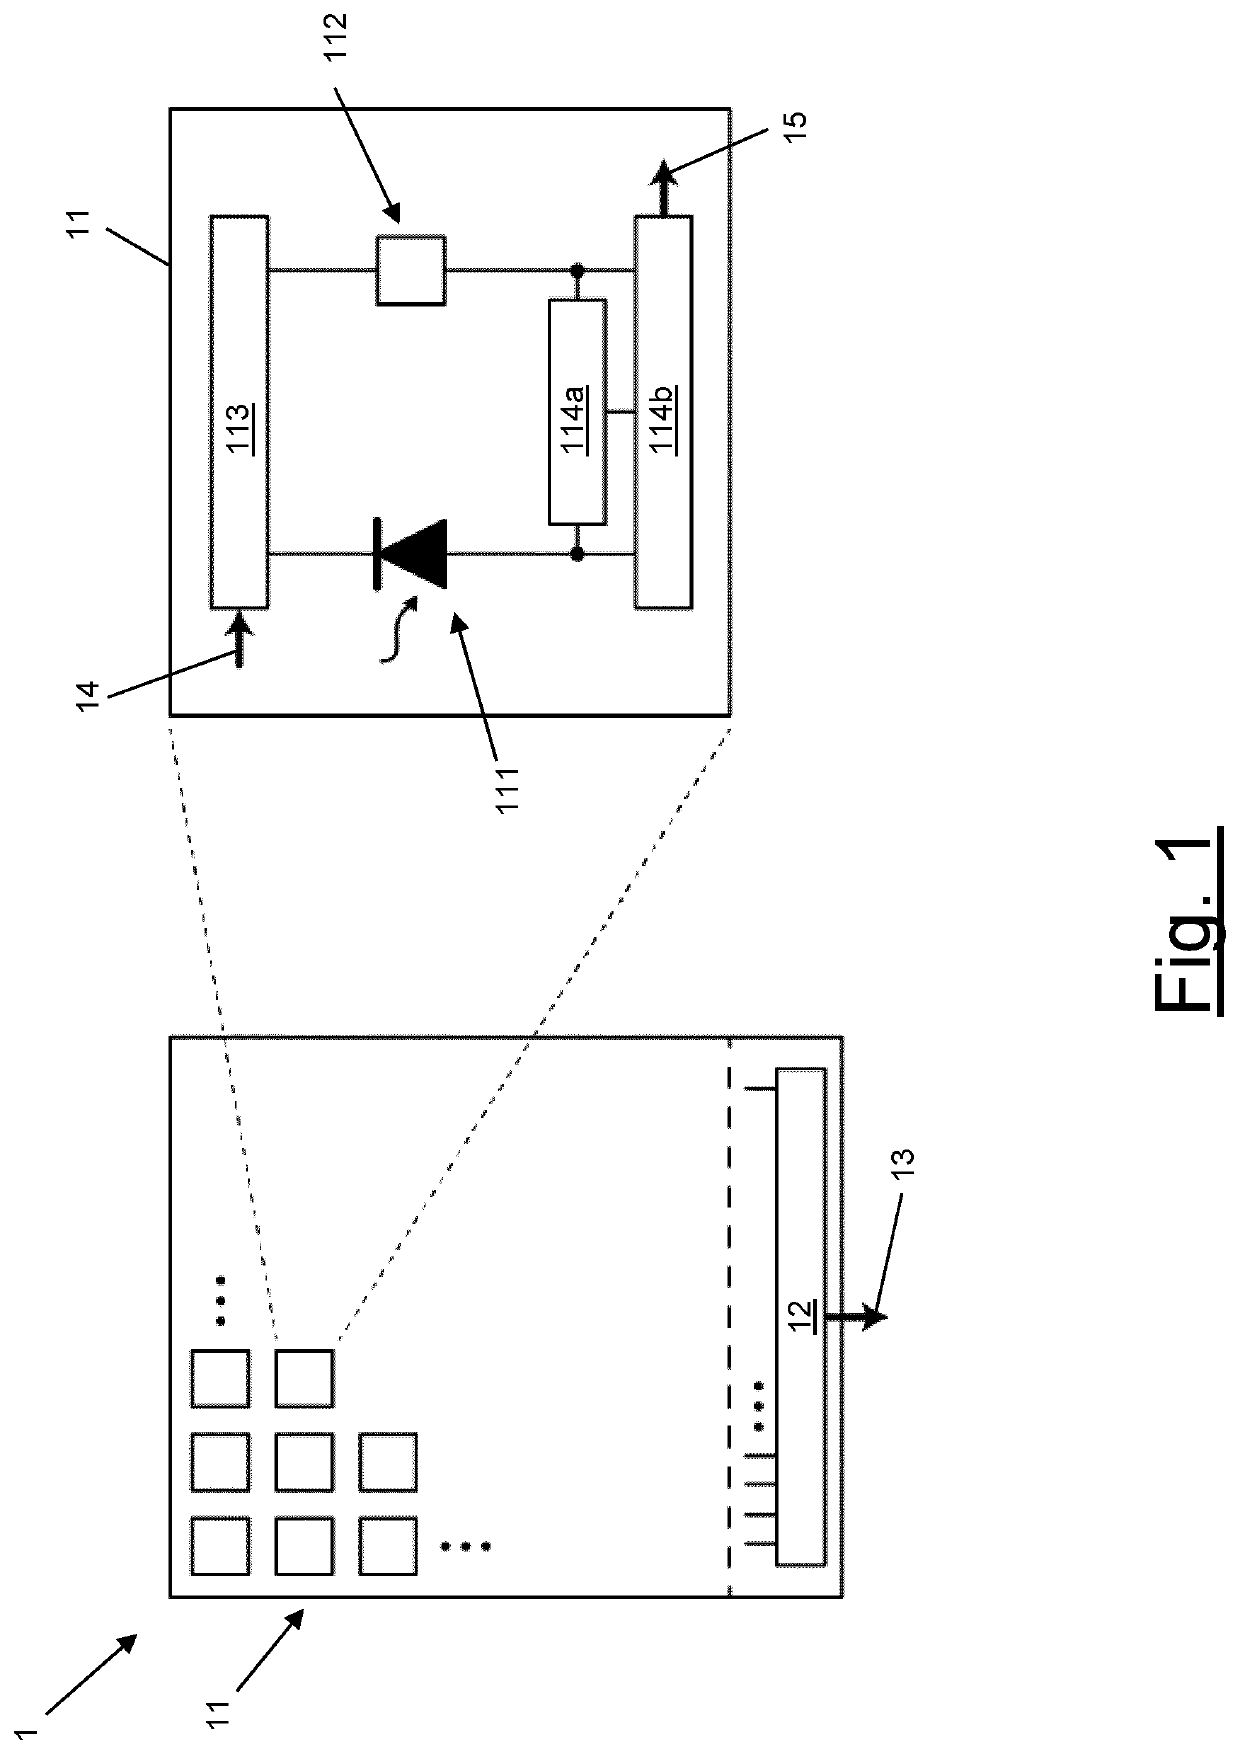 Wide-area single-photon detector with time-gating capability